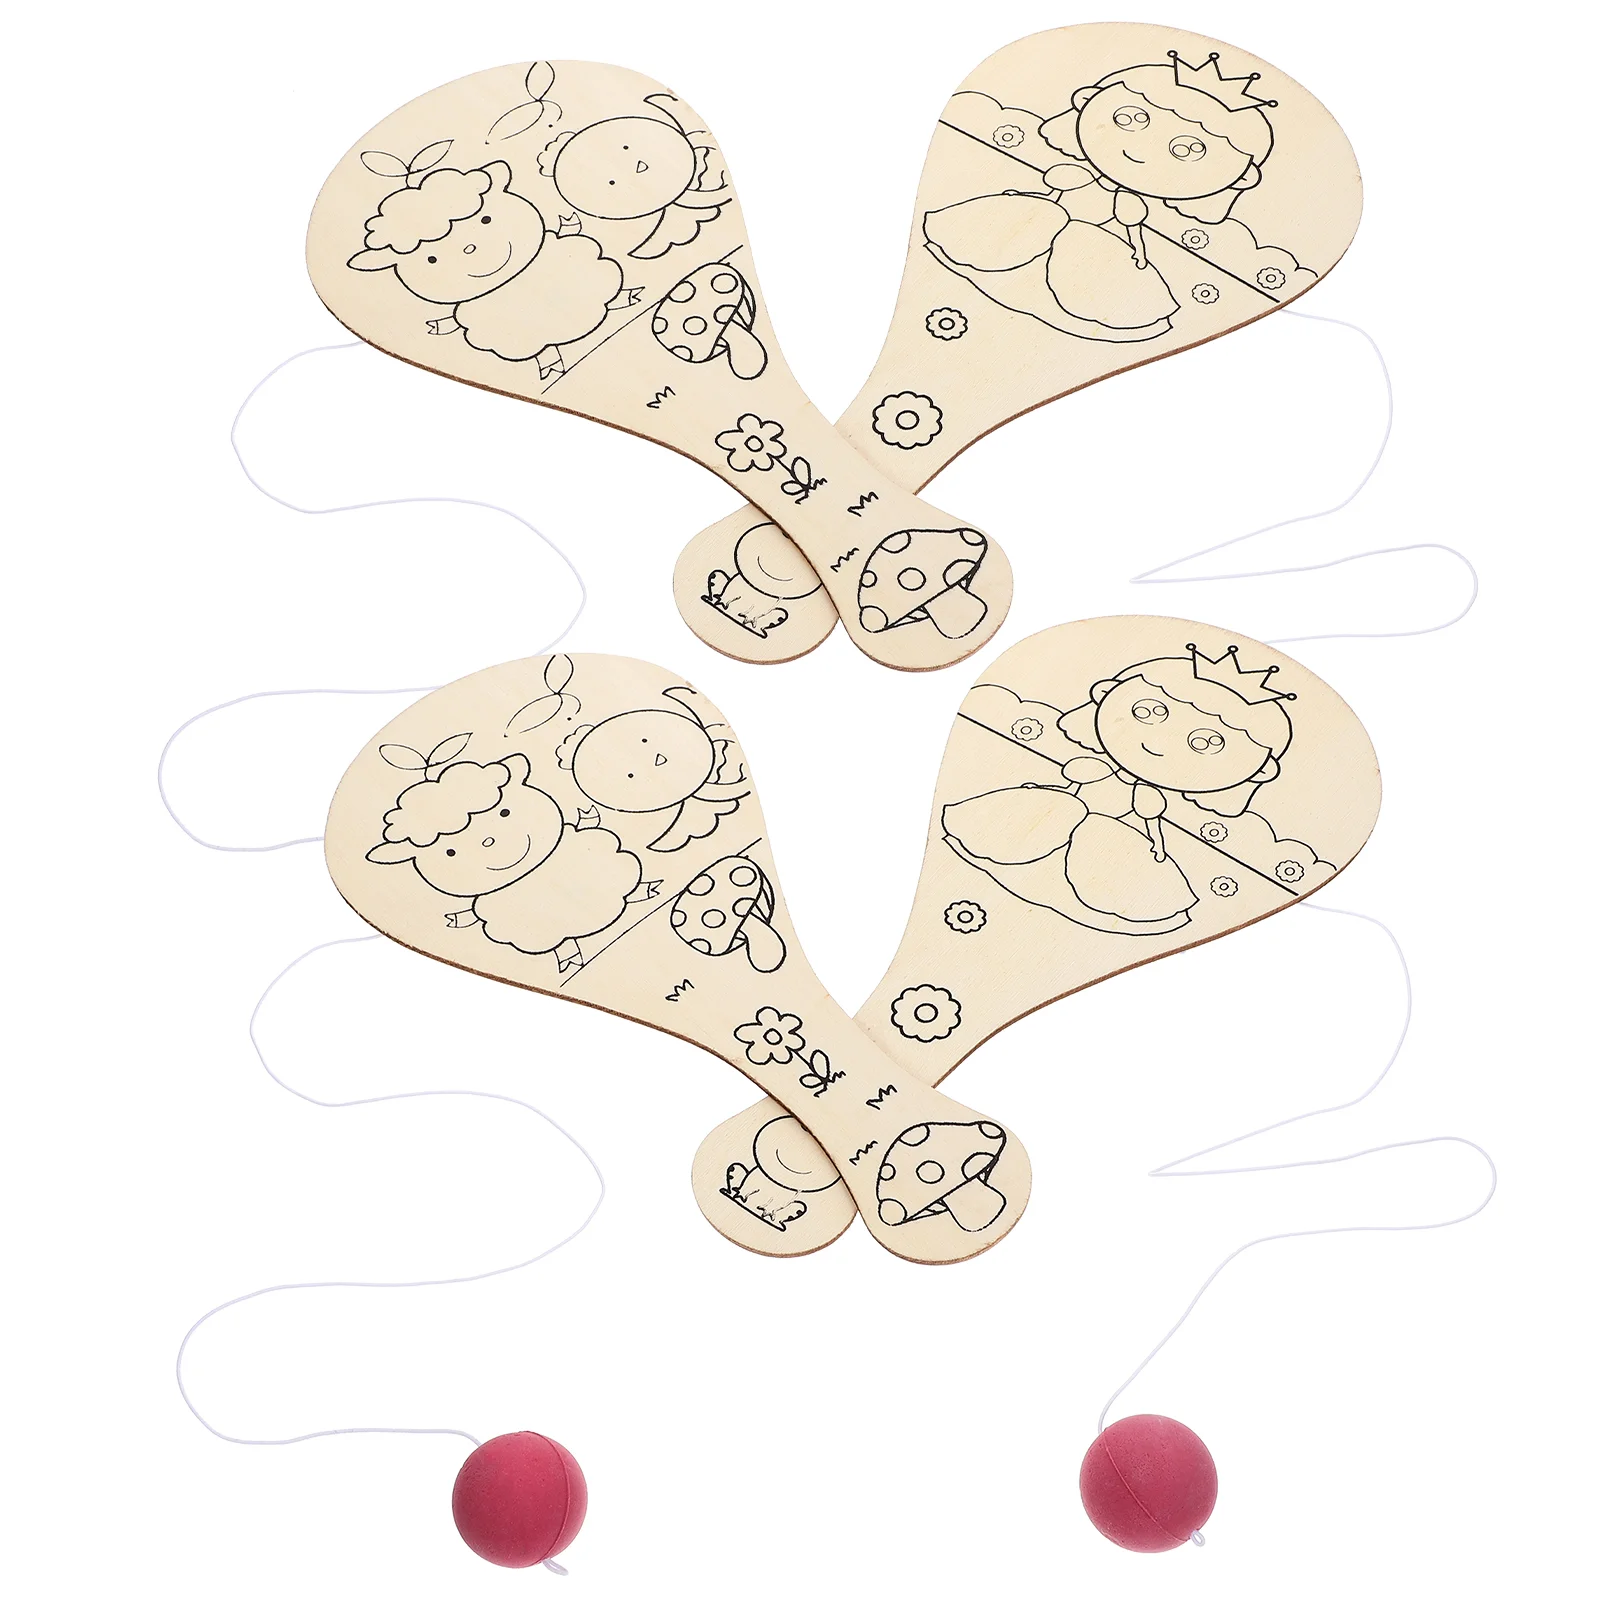 

4 Pcs Graffiti Blank Racket Doodle Board Painting Toy Wood Kids Draw Wooden Paddle Unfinished Child